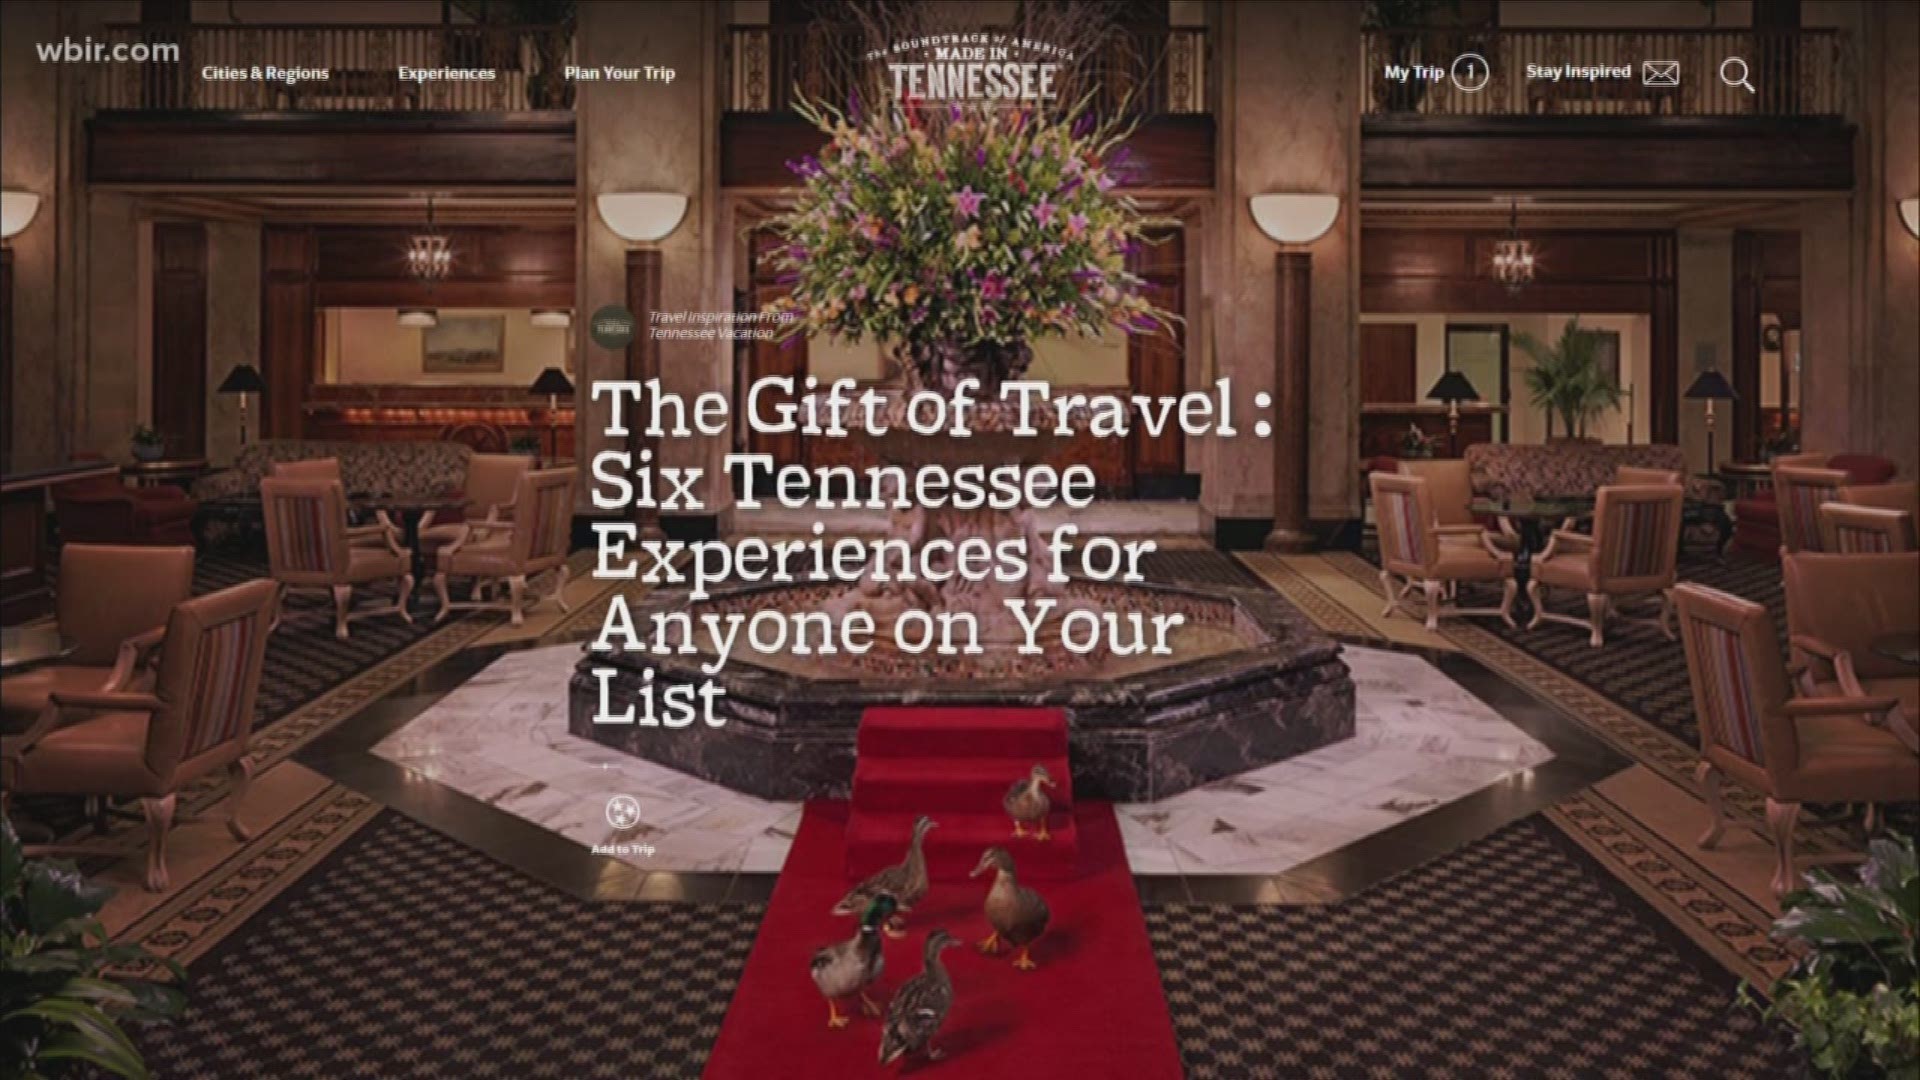 Dave Jones from the Tennessee Department of Tourist Development has six gift ideas for the traveler in your life.